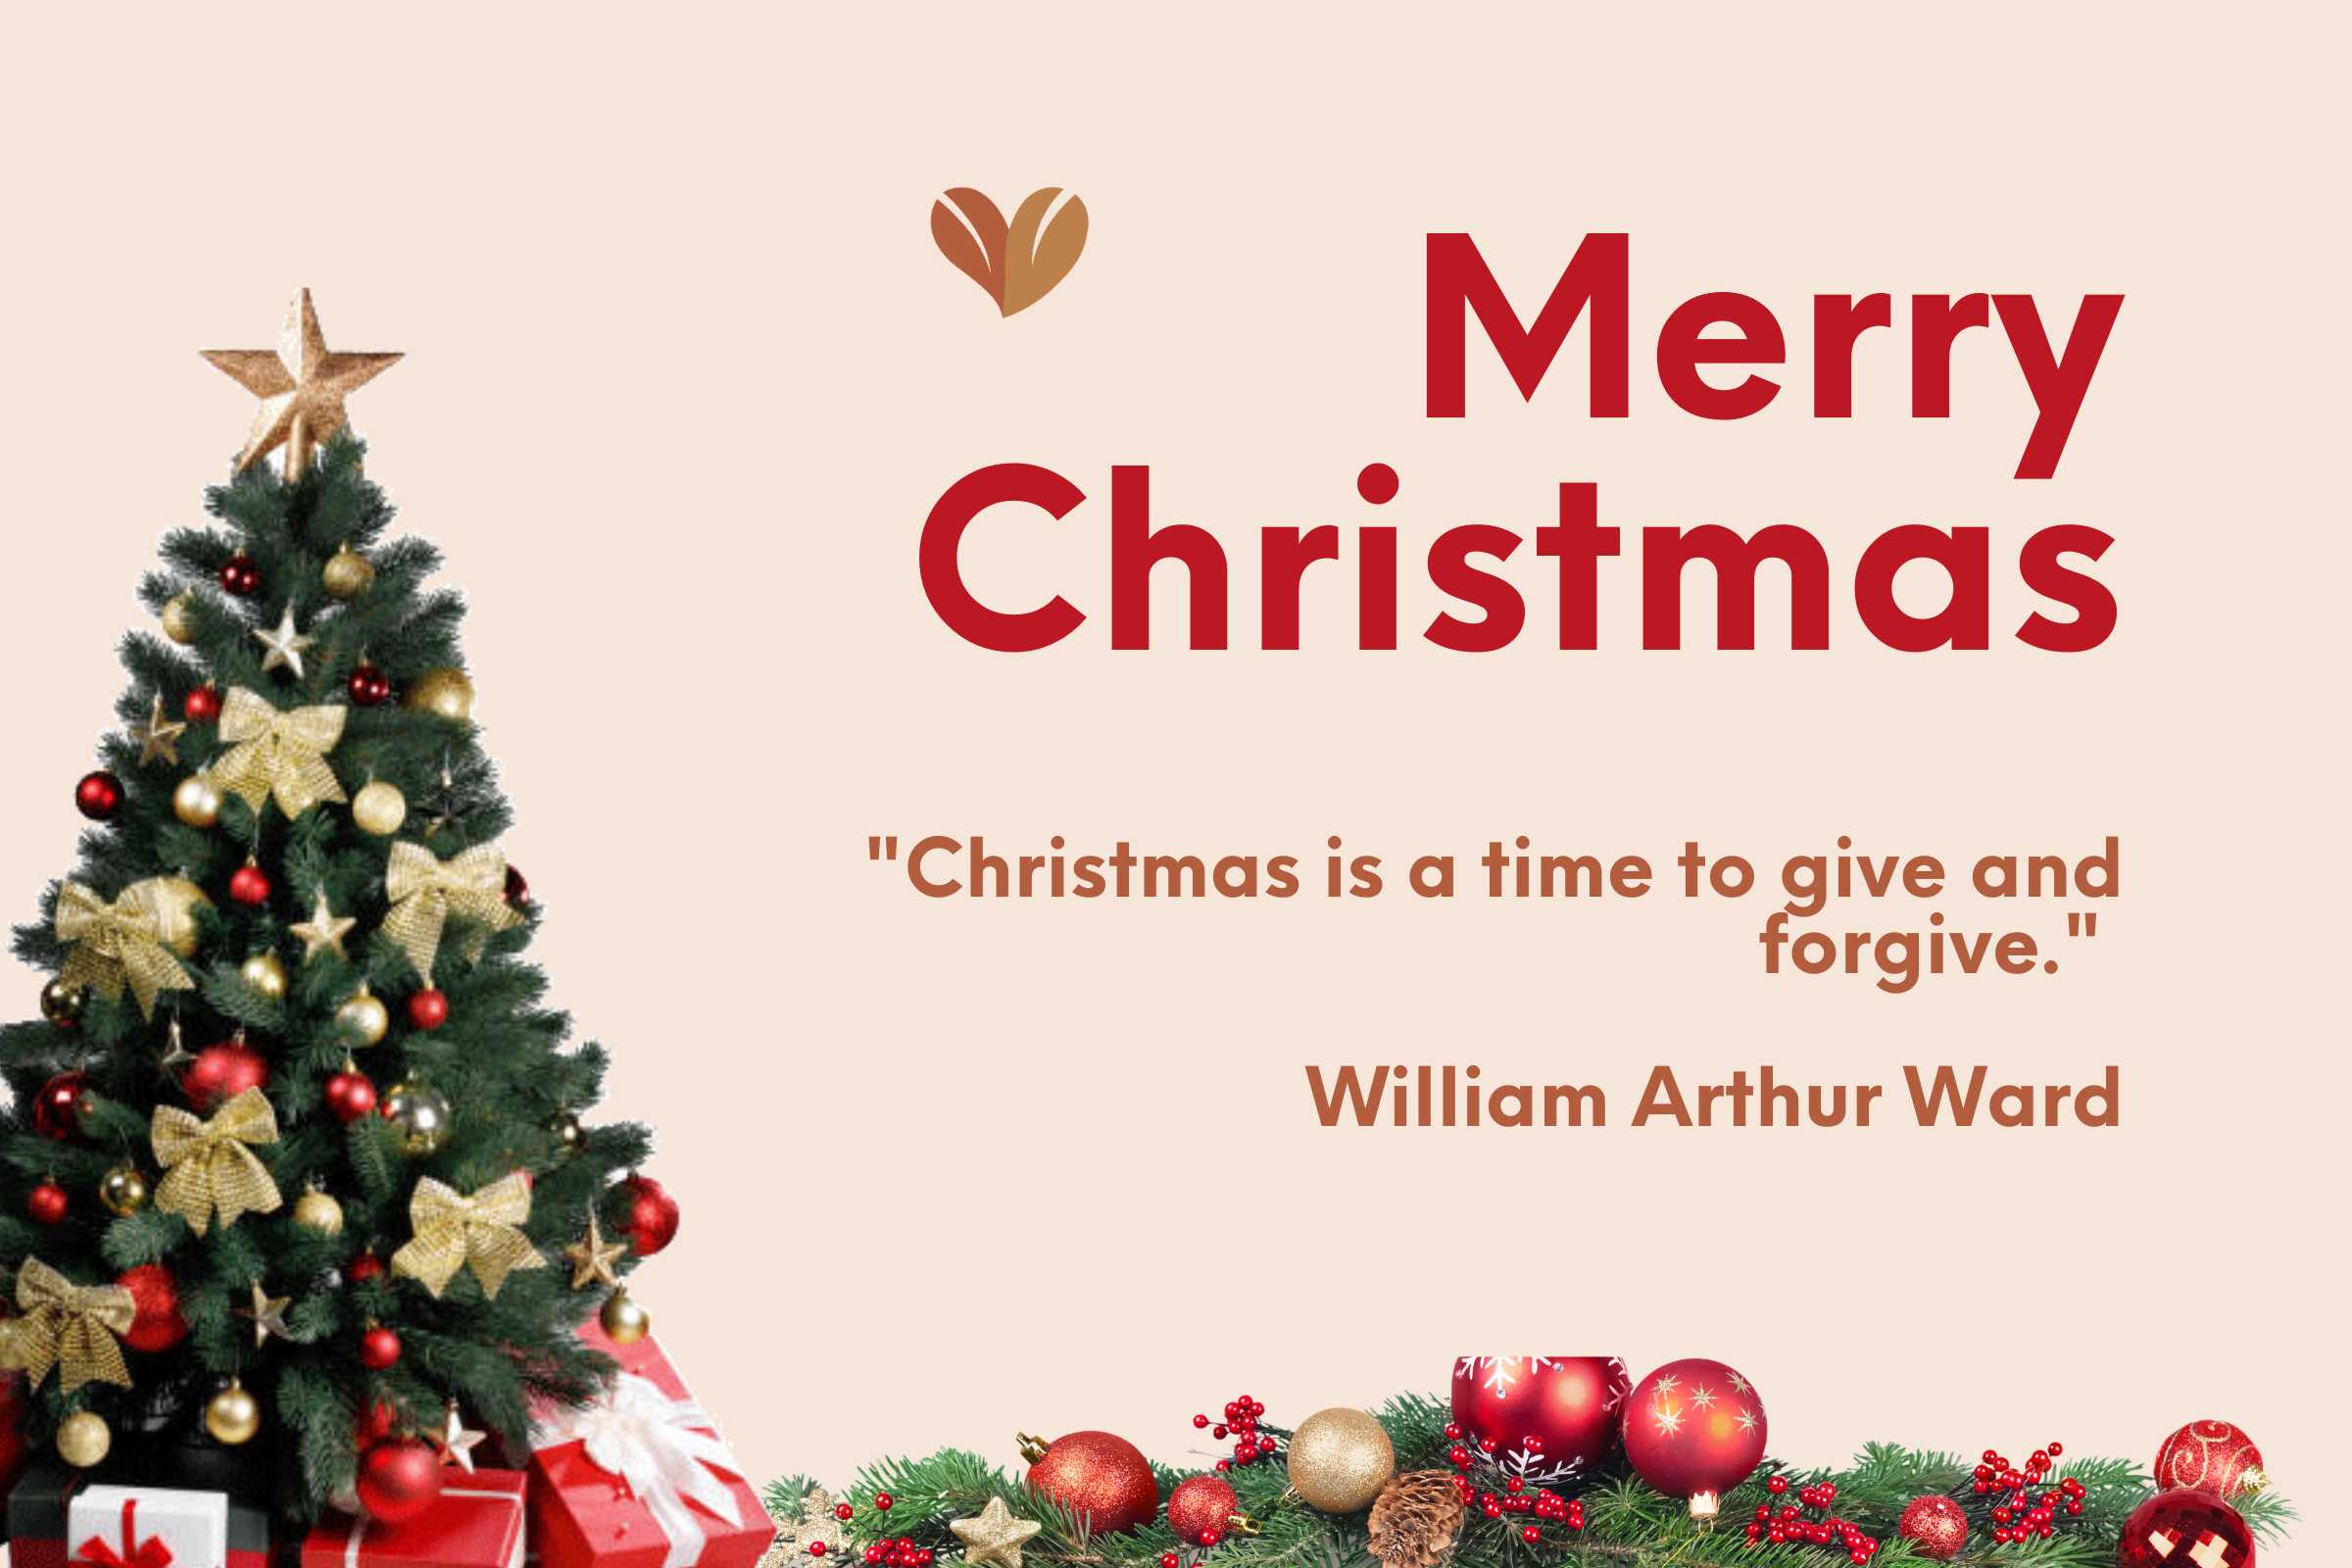 Short Christmas Sayings - time to give and forgive in this season